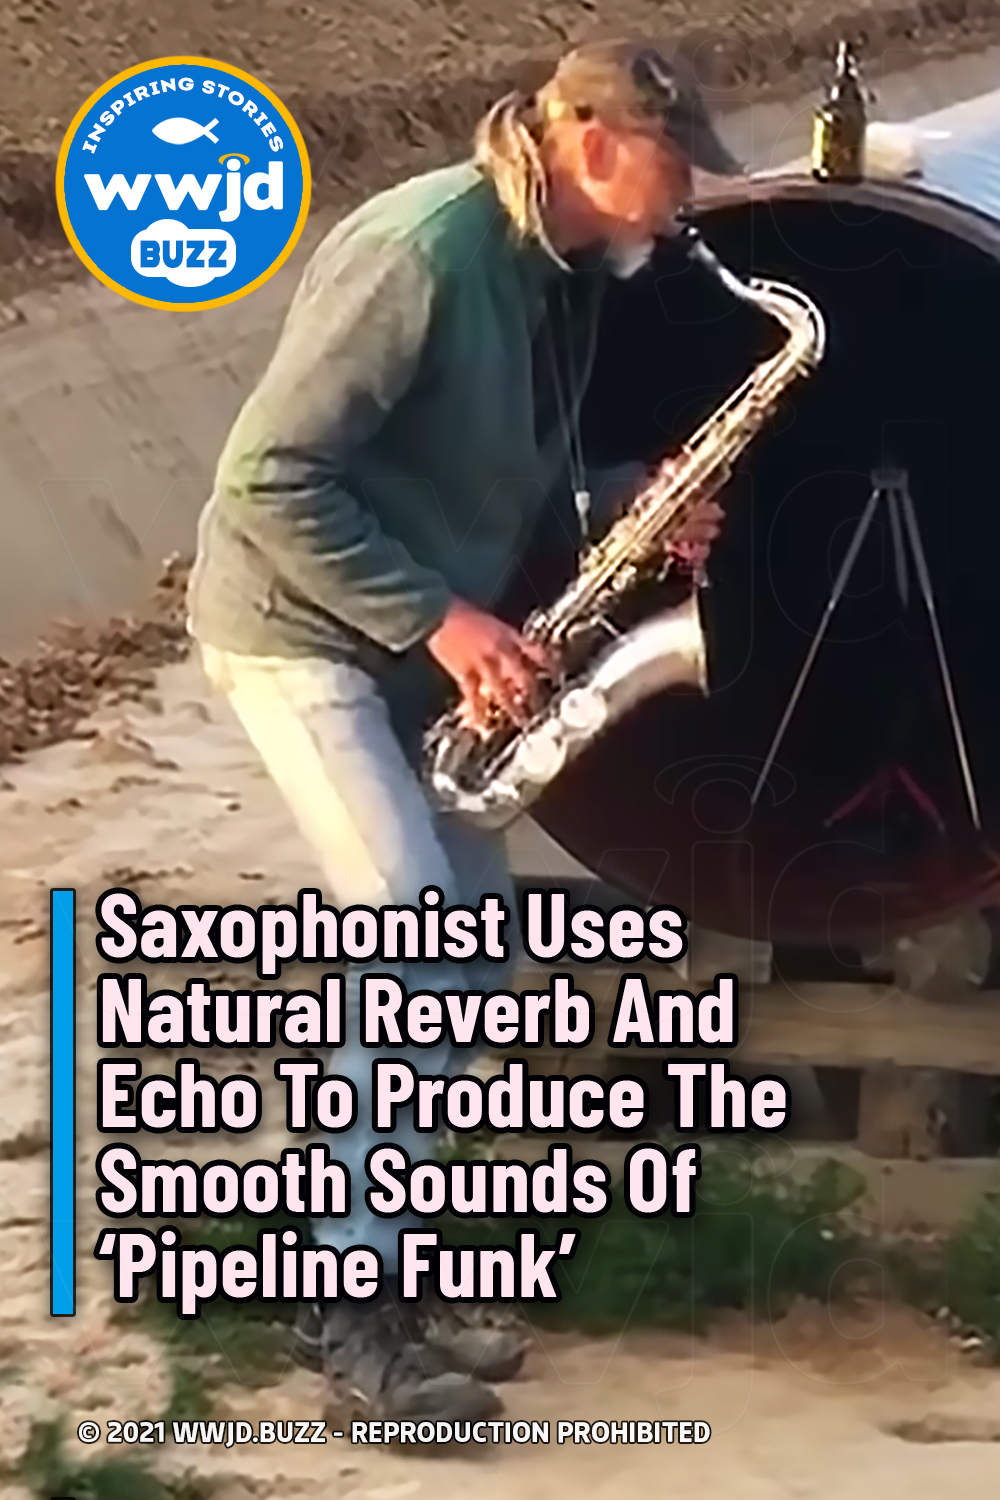 Saxophonist Uses Natural Reverb And Echo To Produce The Smooth Sounds Of ‘Pipeline Funk’